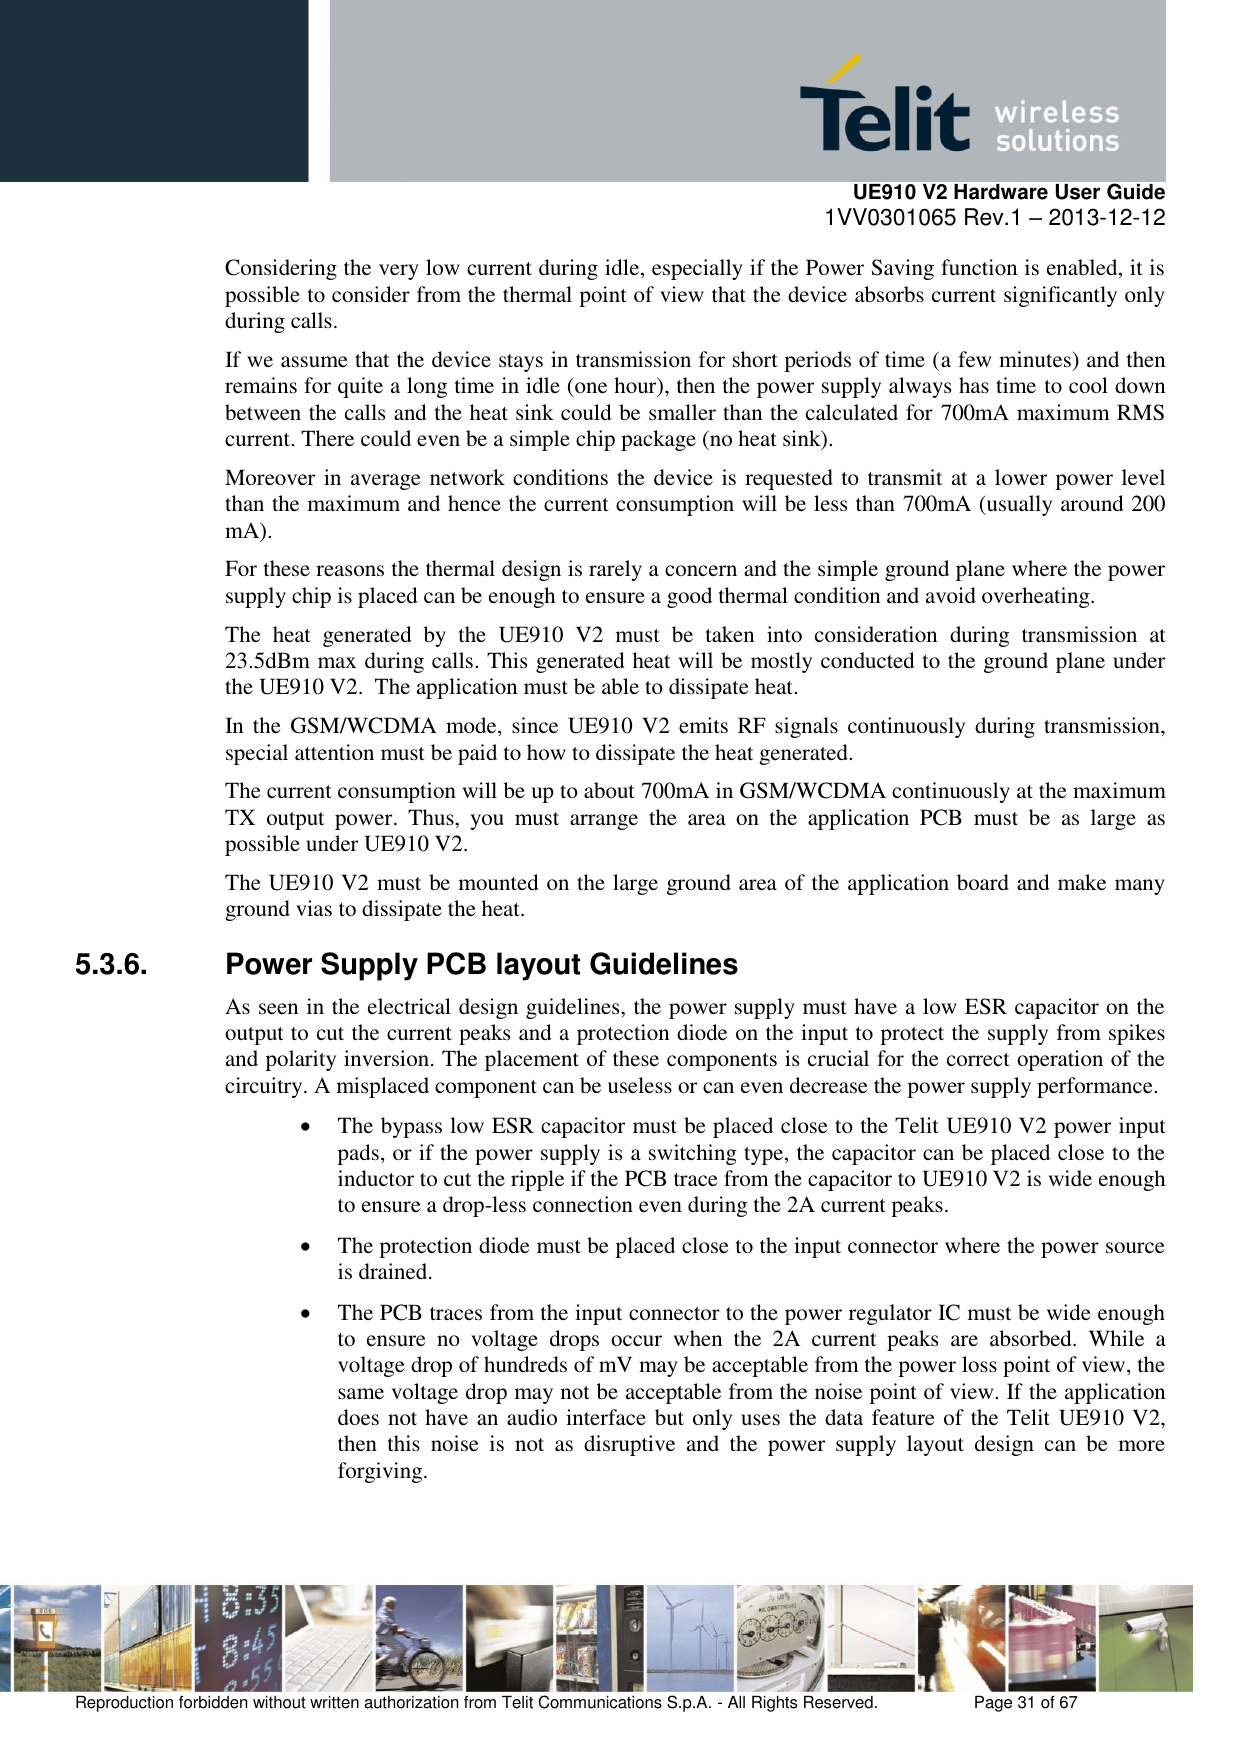     UE910 V2 Hardware User Guide 1VV0301065 Rev.1 – 2013-12-12  Reproduction forbidden without written authorization from Telit Communications S.p.A. - All Rights Reserved.    Page 31 of 67                                                     Considering the very low current during idle, especially if the Power Saving function is enabled, it is possible to consider from the thermal point of view that the device absorbs current significantly only during calls.  If we assume that the device stays in transmission for short periods of time (a few minutes) and then remains for quite a long time in idle (one hour), then the power supply always has time to cool down between the calls and the heat sink could be smaller than the calculated for 700mA maximum RMS current. There could even be a simple chip package (no heat sink). Moreover in average network conditions the device is requested to transmit at a lower power level than the maximum and hence the current consumption will be less than 700mA (usually around 200 mA). For these reasons the thermal design is rarely a concern and the simple ground plane where the power supply chip is placed can be enough to ensure a good thermal condition and avoid overheating. The  heat  generated  by  the  UE910  V2  must  be  taken  into  consideration  during  transmission  at 23.5dBm max during calls. This generated heat will be mostly conducted to the ground plane under the UE910 V2.  The application must be able to dissipate heat. In the GSM/WCDMA mode, since UE910 V2  emits RF signals  continuously  during transmission, special attention must be paid to how to dissipate the heat generated. The current consumption will be up to about 700mA in GSM/WCDMA continuously at the maximum TX  output  power.  Thus,  you  must  arrange  the  area  on  the  application  PCB  must  be  as  large  as possible under UE910 V2. The UE910 V2 must be mounted on the large ground area of the application board and make many ground vias to dissipate the heat. 5.3.6.  Power Supply PCB layout Guidelines As seen in the electrical design guidelines, the power supply must have a low ESR capacitor on the output to cut the current peaks and a protection diode on the input to protect the supply from spikes and polarity inversion. The placement of these components is crucial for the correct operation of the circuitry. A misplaced component can be useless or can even decrease the power supply performance.  The bypass low ESR capacitor must be placed close to the Telit UE910 V2 power input pads, or if the power supply is a switching type, the capacitor can be placed close to the inductor to cut the ripple if the PCB trace from the capacitor to UE910 V2 is wide enough to ensure a drop-less connection even during the 2A current peaks.  The protection diode must be placed close to the input connector where the power source is drained.  The PCB traces from the input connector to the power regulator IC must be wide enough to  ensure  no  voltage  drops  occur  when  the  2A  current  peaks  are  absorbed.  While  a voltage drop of hundreds of mV may be acceptable from the power loss point of view, the same voltage drop may not be acceptable from the noise point of view. If the application does not have an audio interface but only uses the data feature of the Telit UE910 V2, then  this  noise  is  not  as  disruptive  and  the  power  supply  layout  design  can  be  more forgiving. 